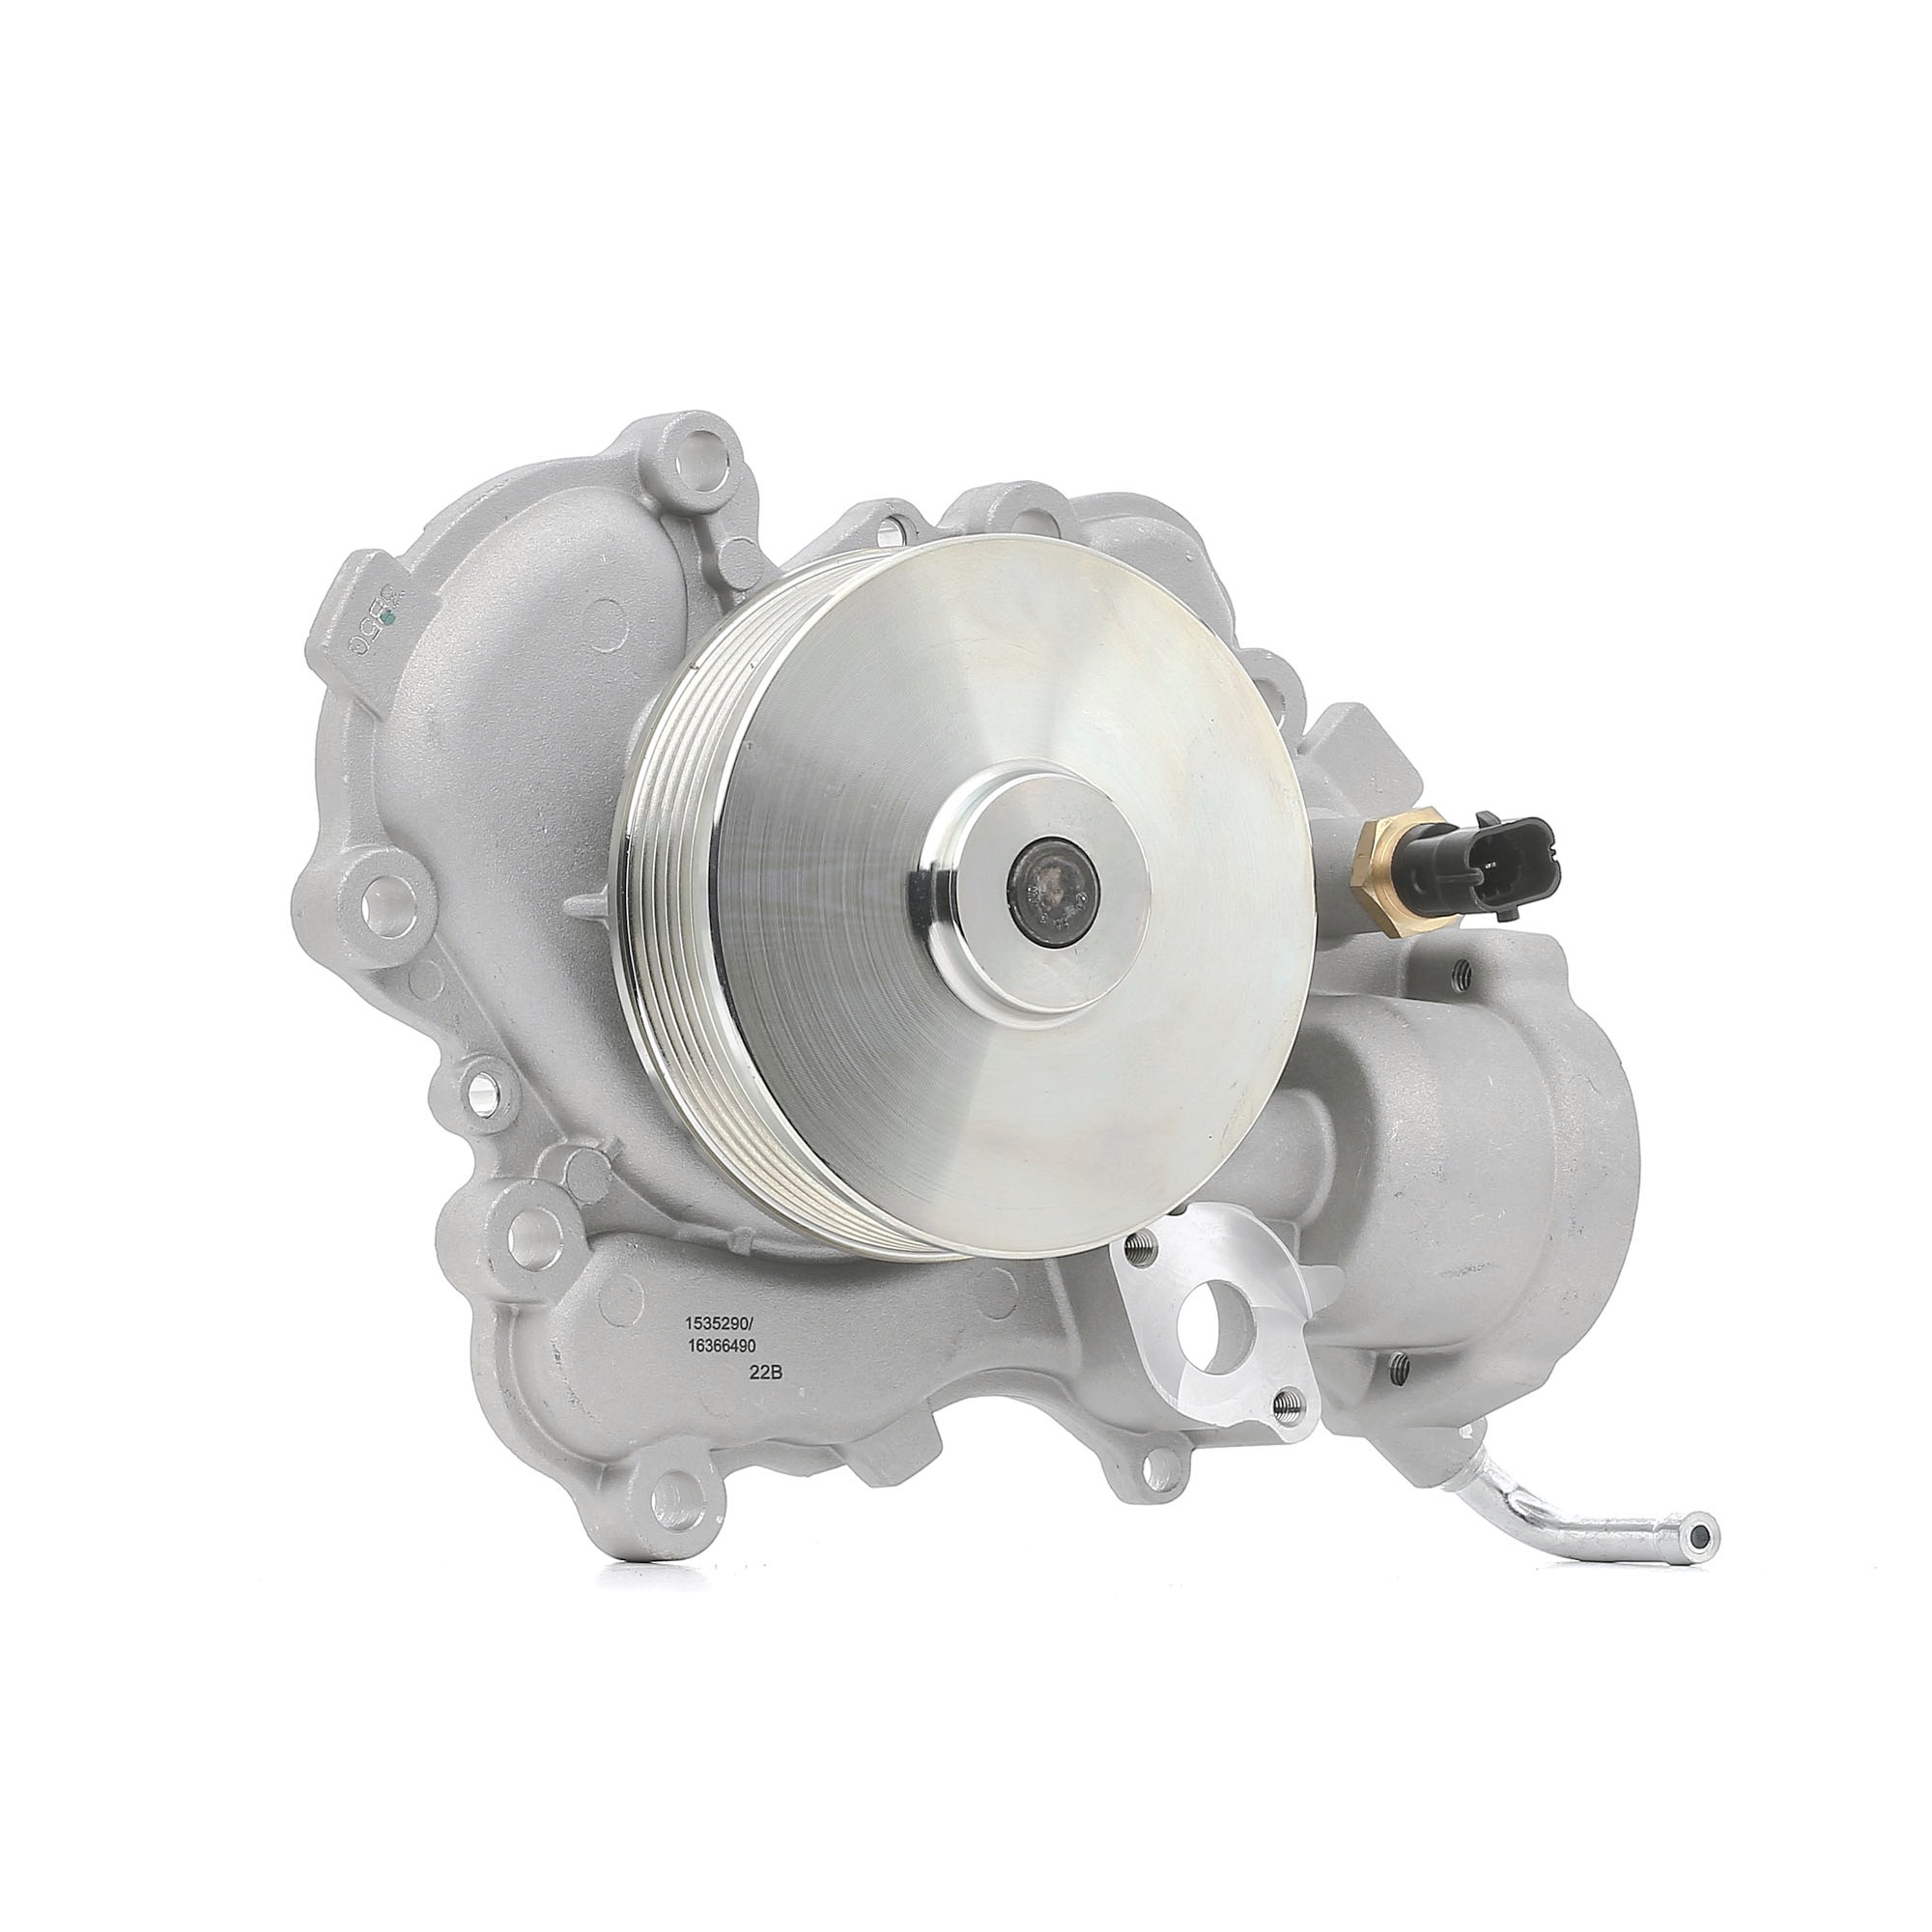 RIDEX 1260W0489 Water pump with seal, without lid, Mechanical, Brass, for v-ribbed belt use